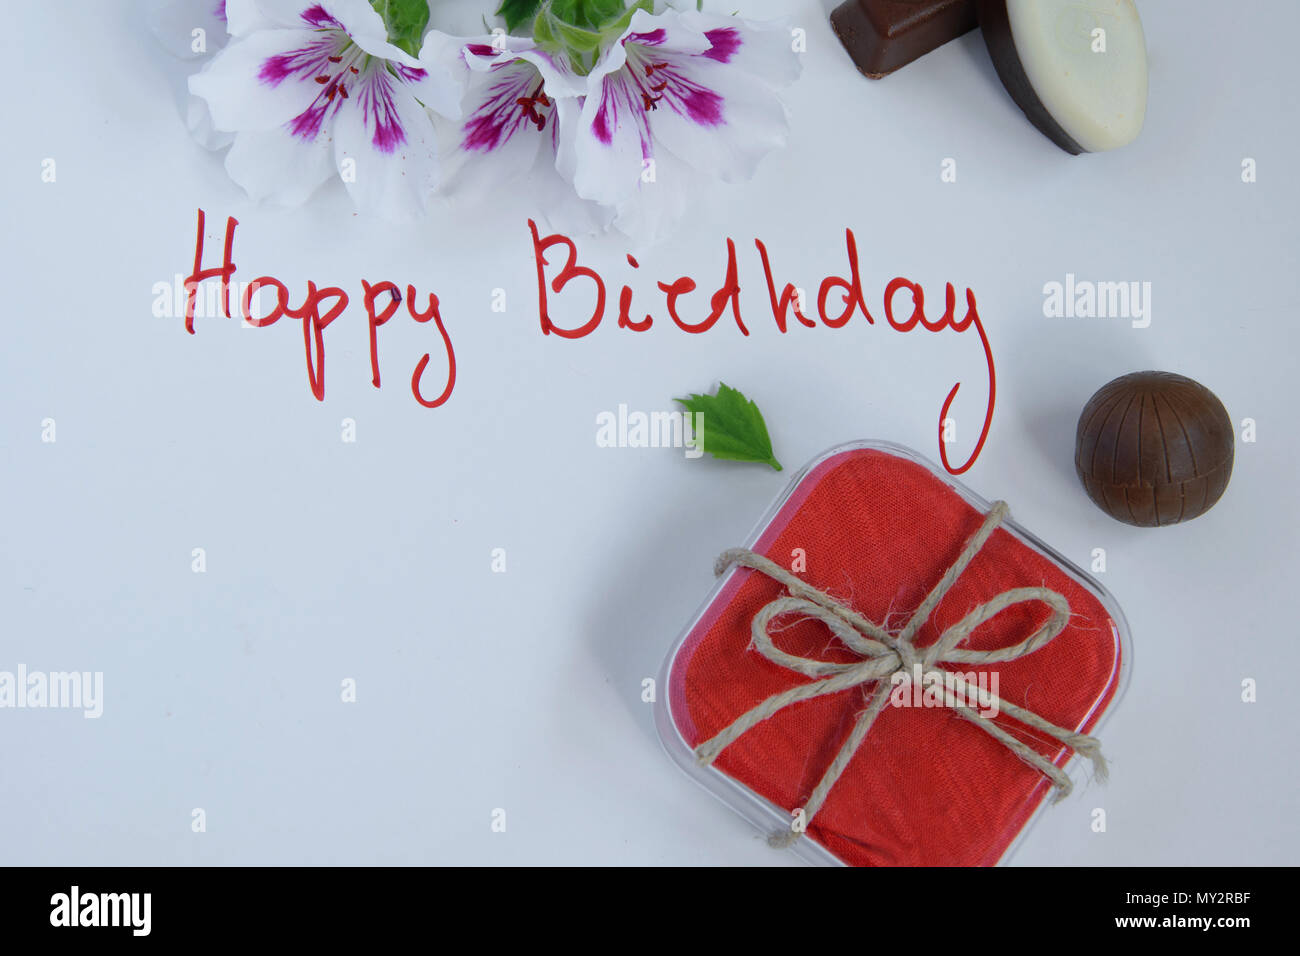 Happy Birthday Greeting Card With Gift Box Fresh Flowers And Chocolates On White Background Stock Photo Alamy